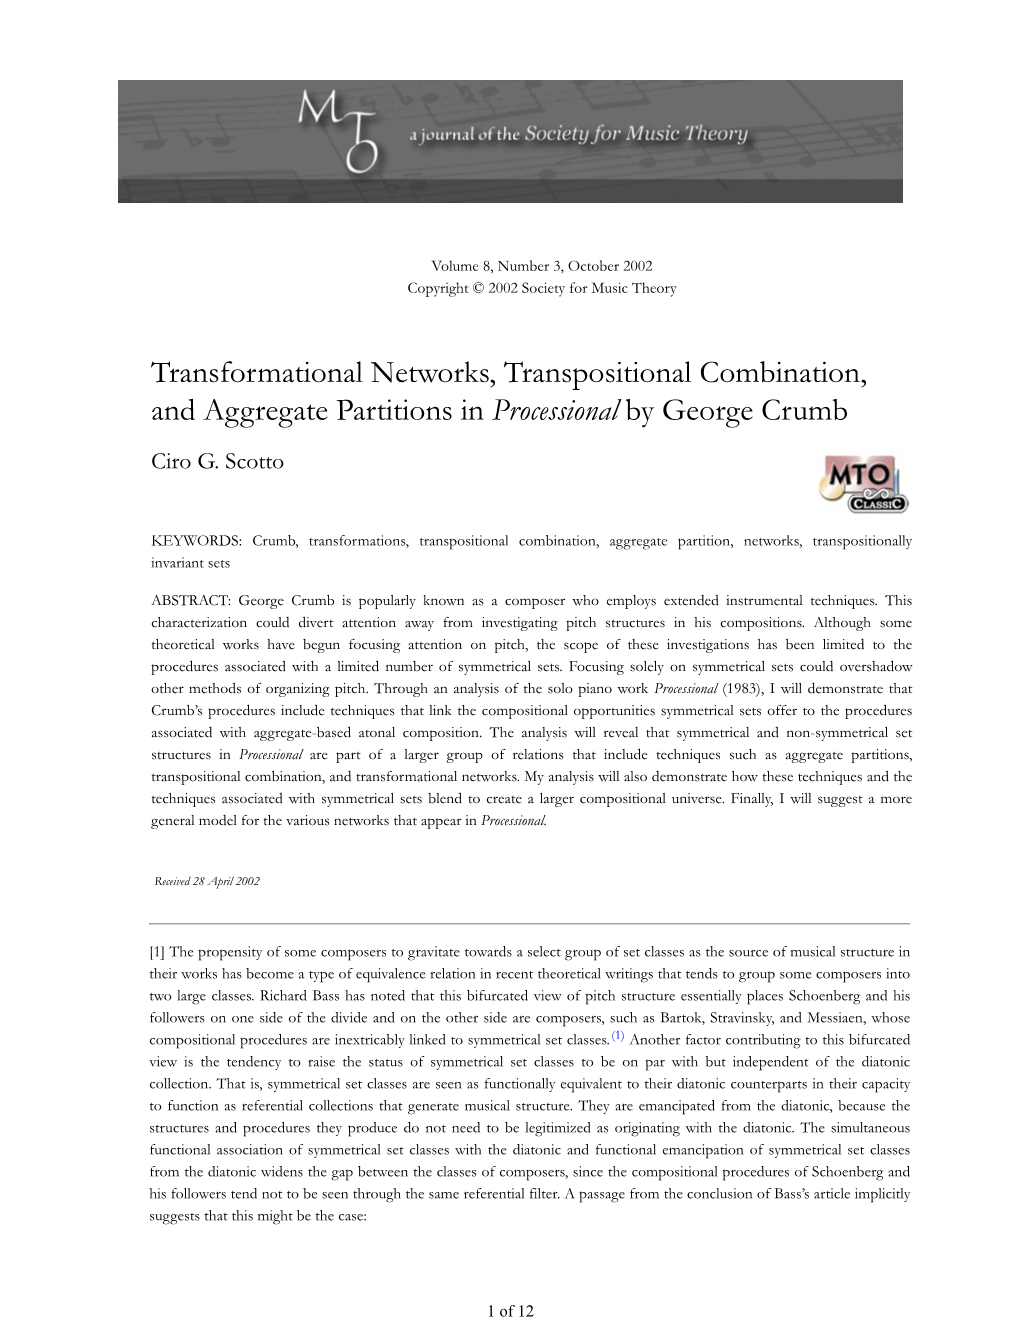 MTO 8.3: Scotto, Transformational Networks, Transpositional